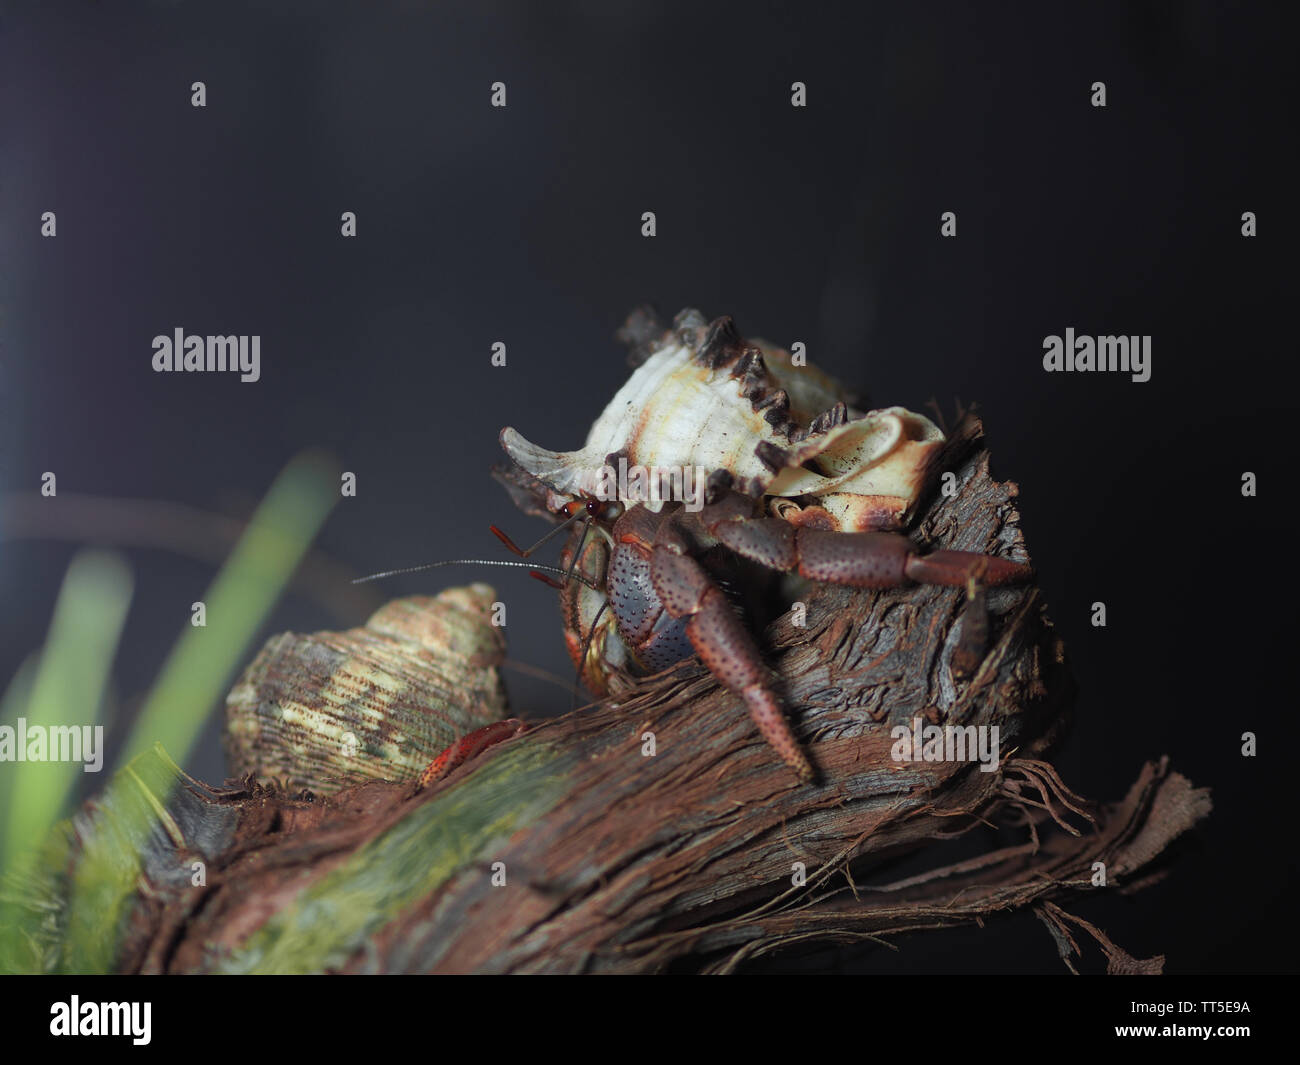 land Hermit crabs in the terrarium on a wine branch with black background Stock Photo